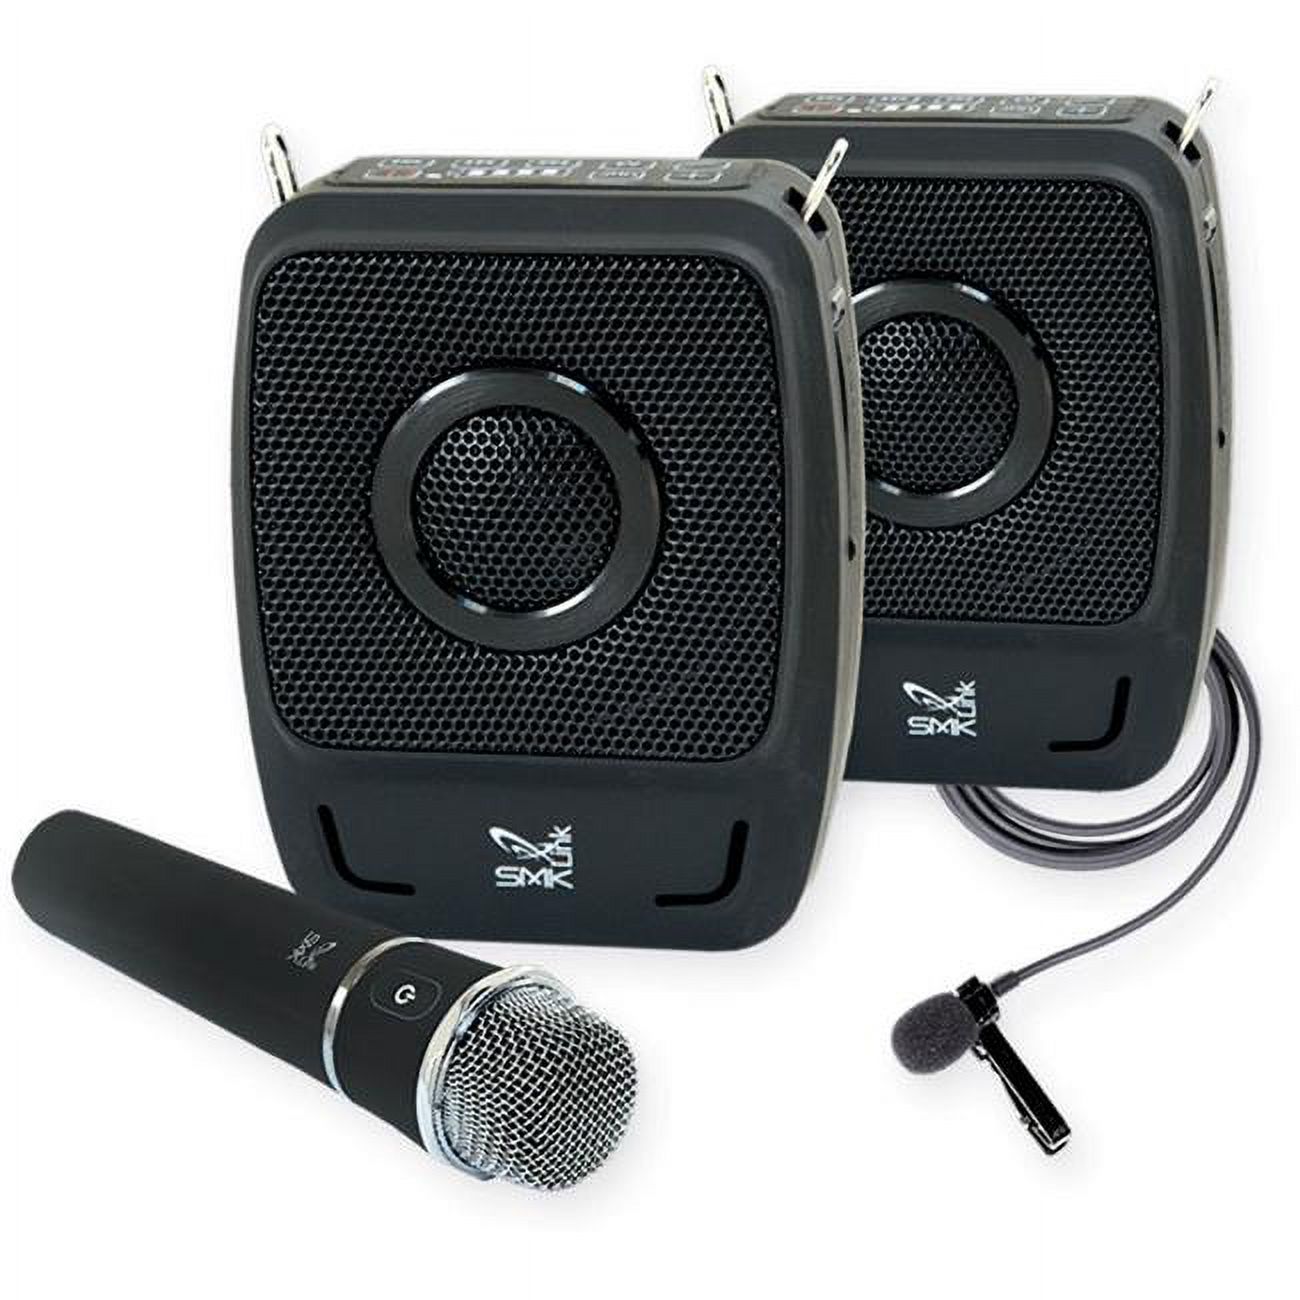 Duet Ultra-Portable Personal Amplification System - image 1 of 1